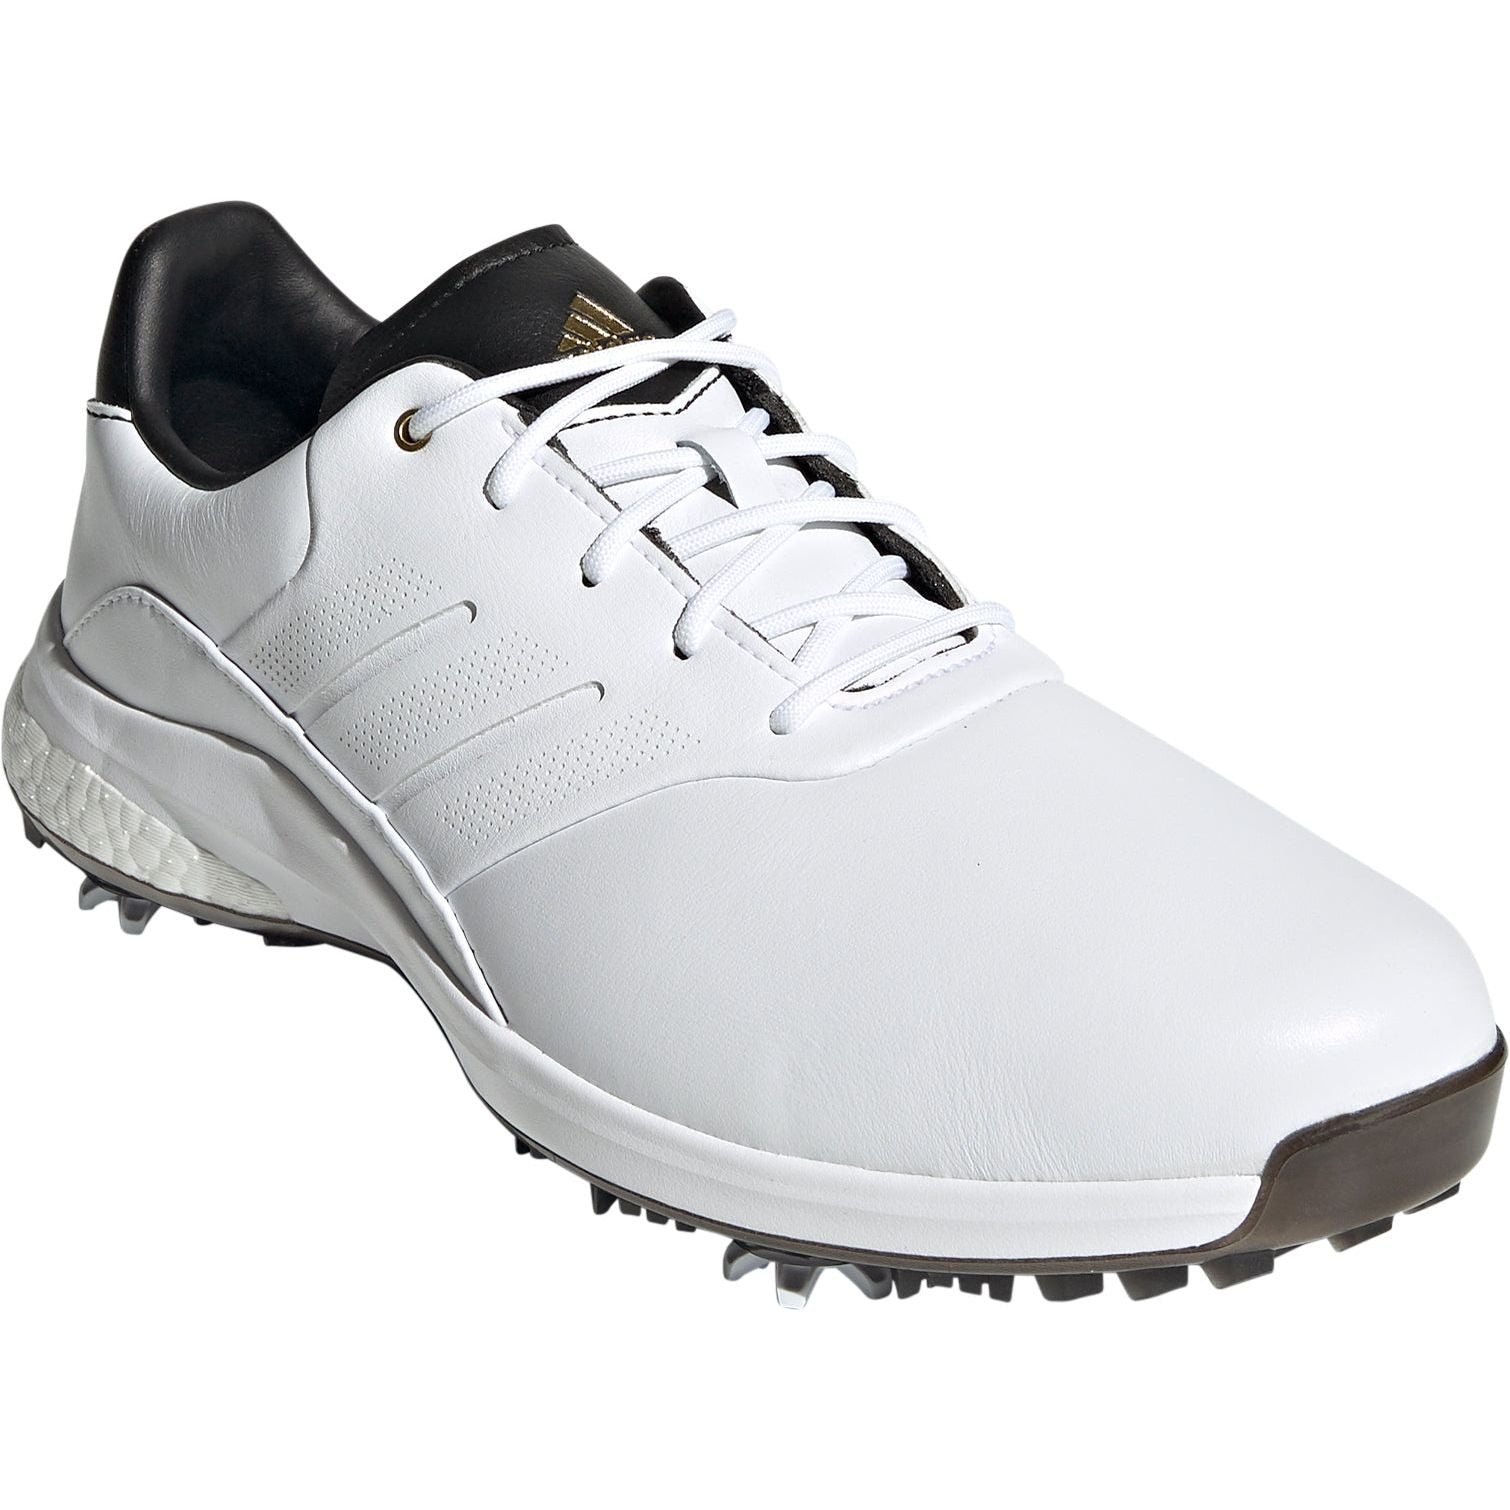 Adidas Performance Classic Golf Shoes Fw6273 Front - Front View